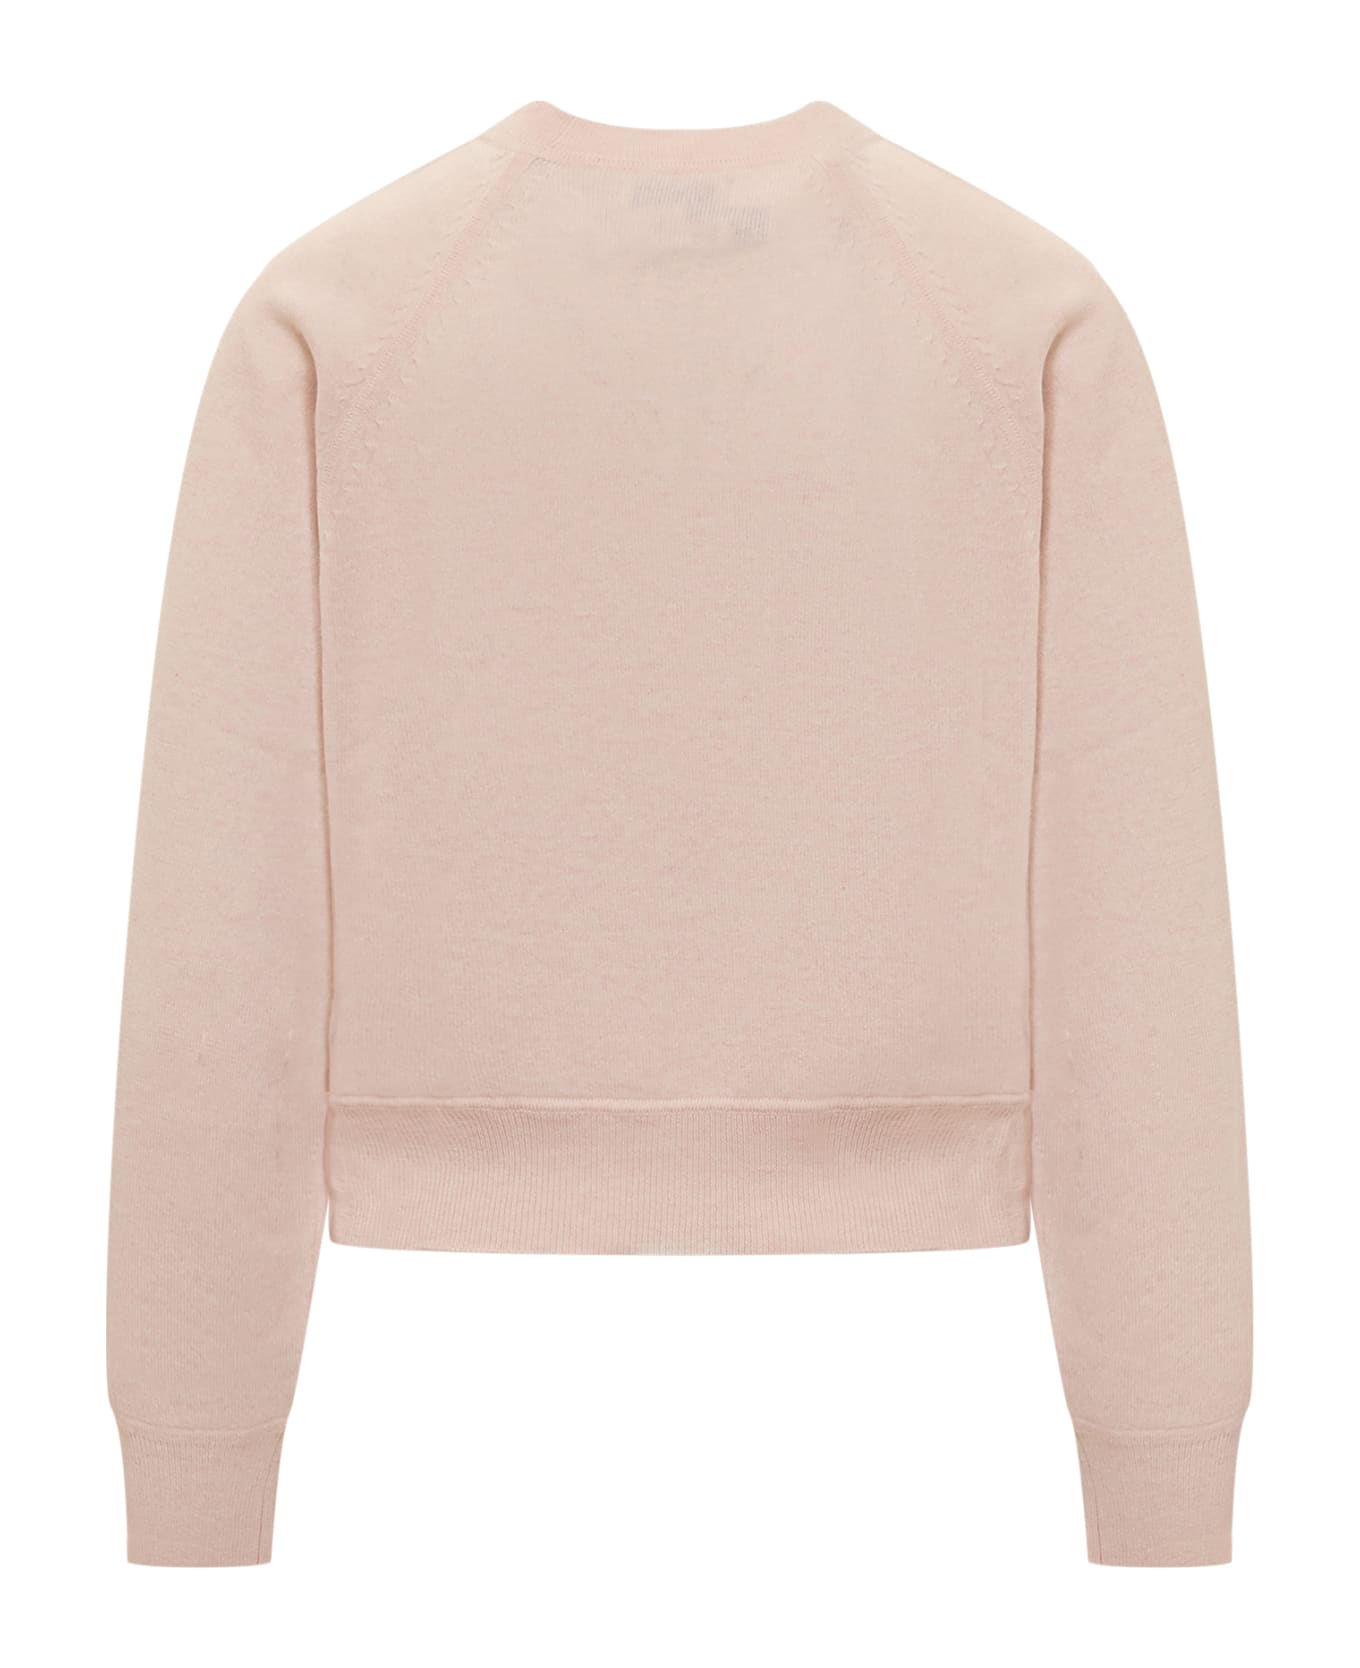 Loulou Studio Loulou Cashmere Sweater - PINK フリース